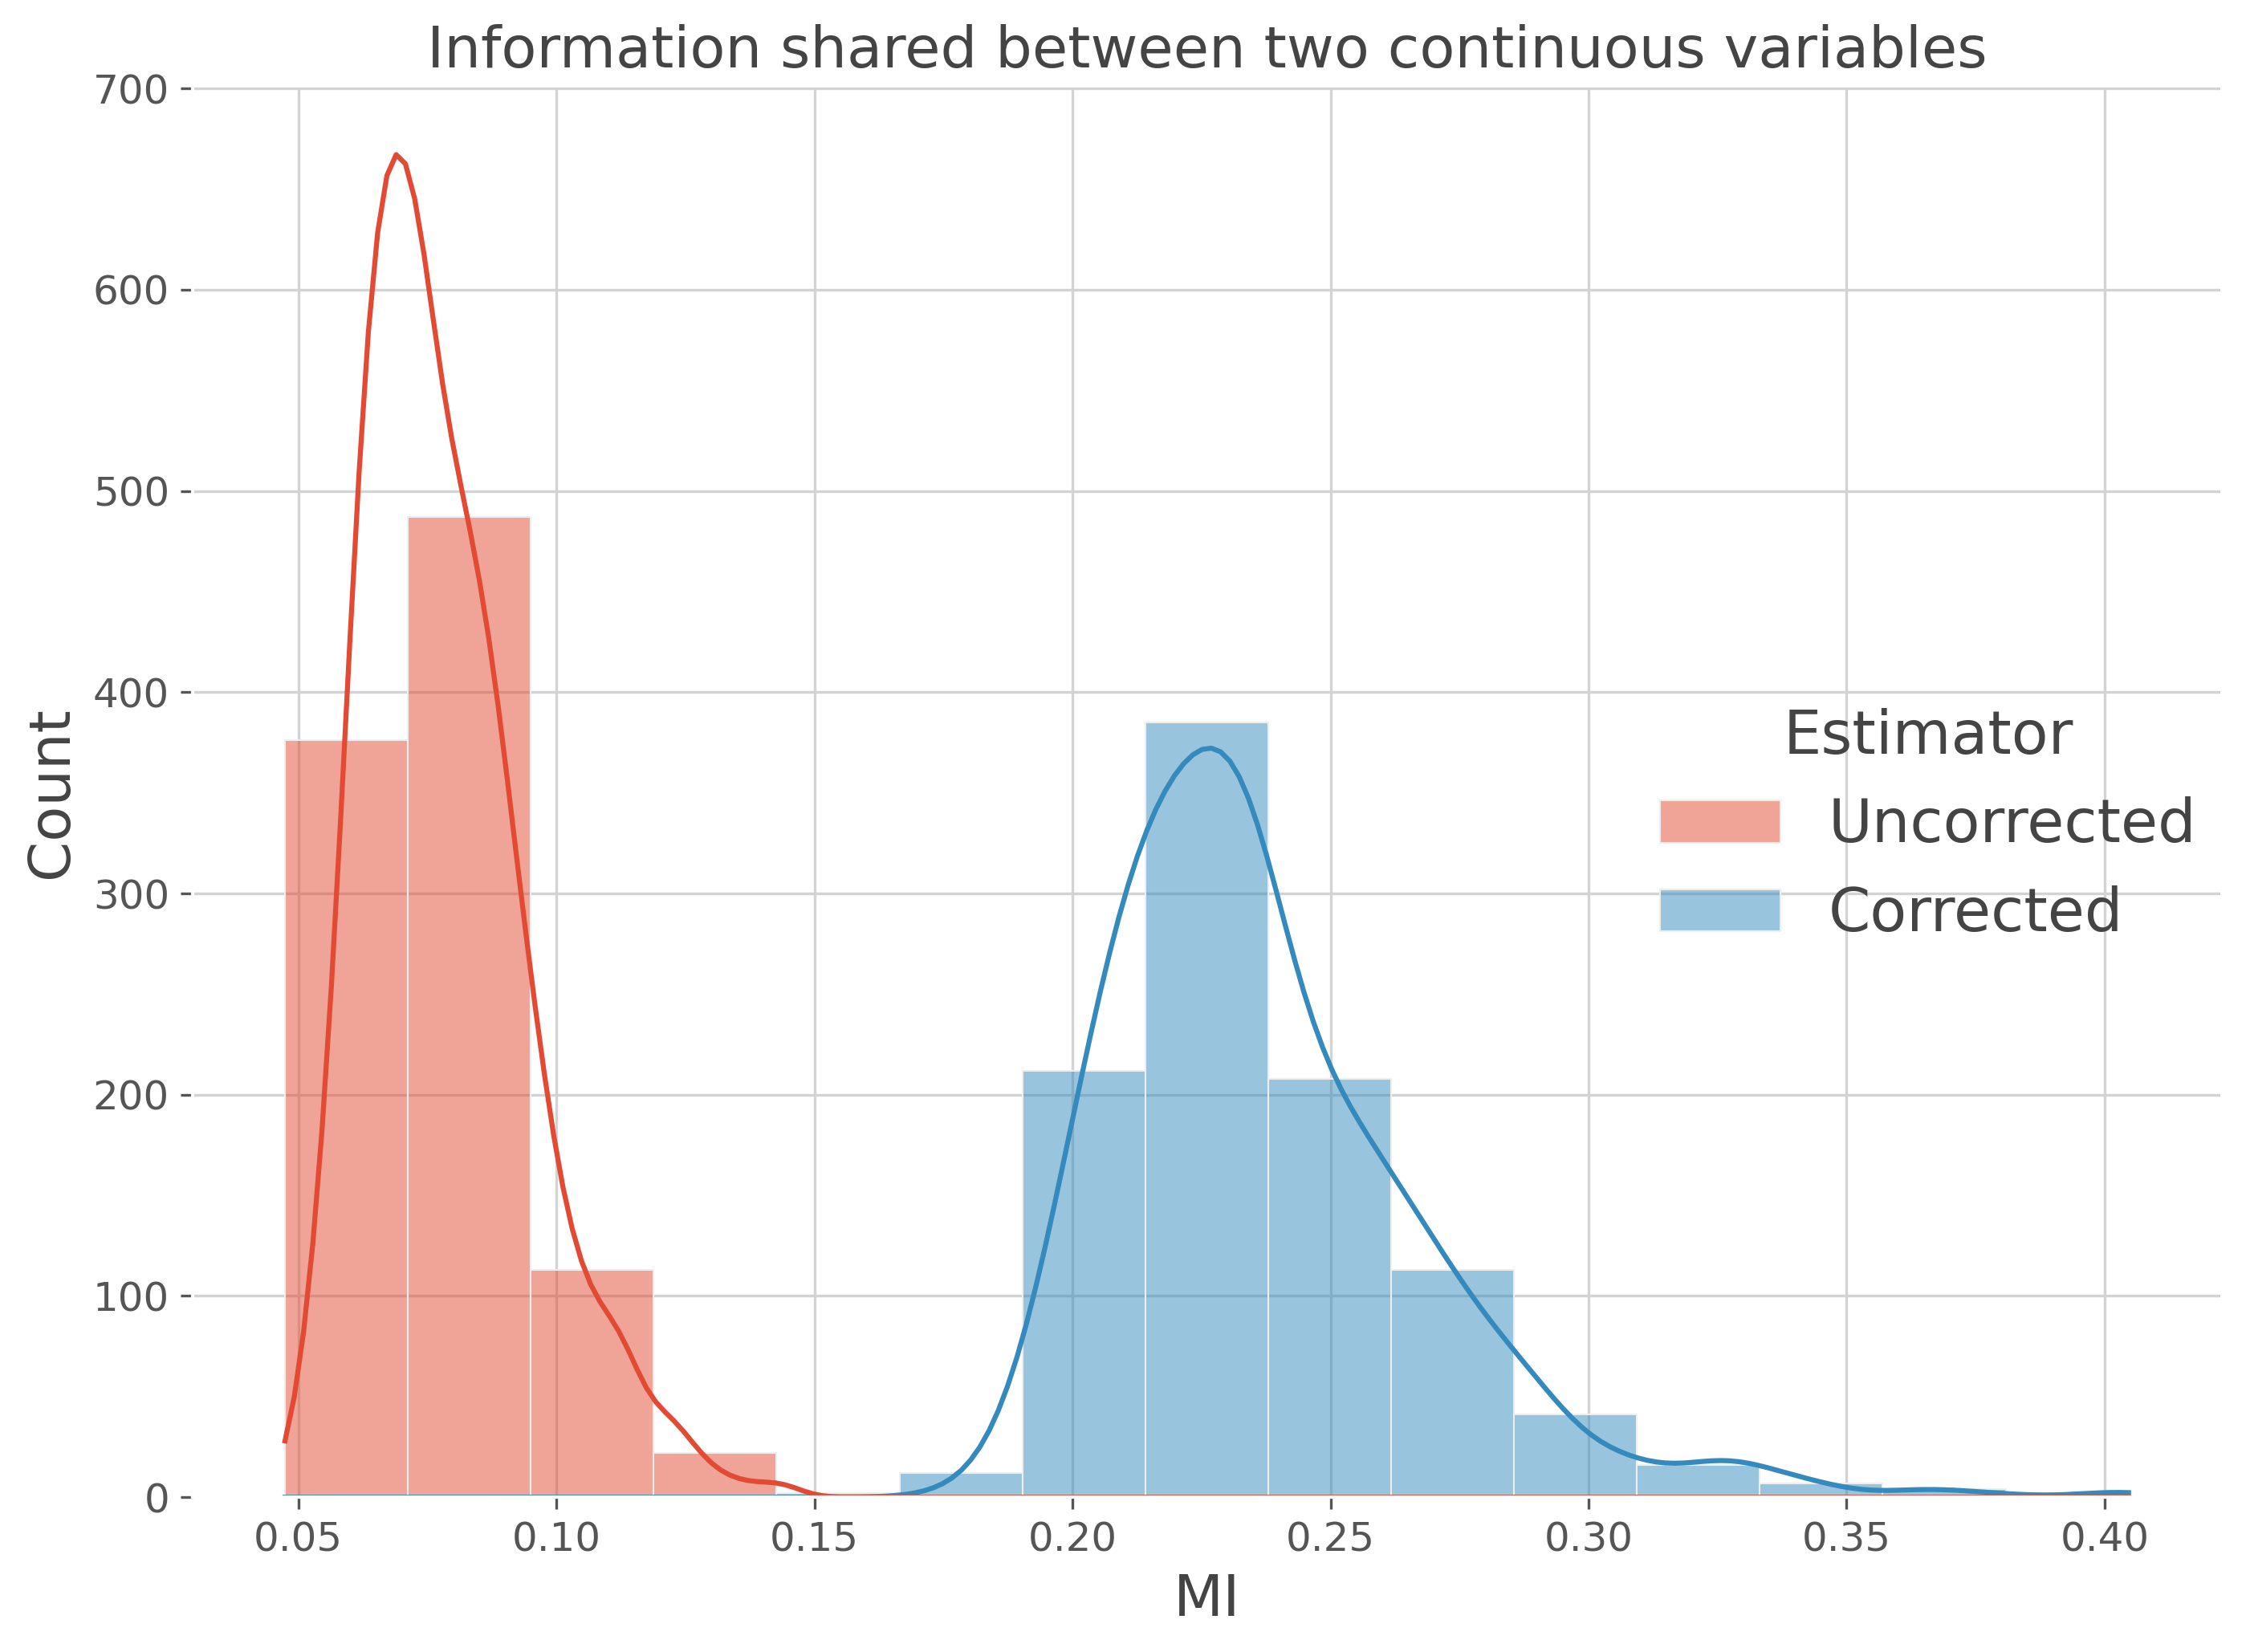 Information shared between two continuous variables